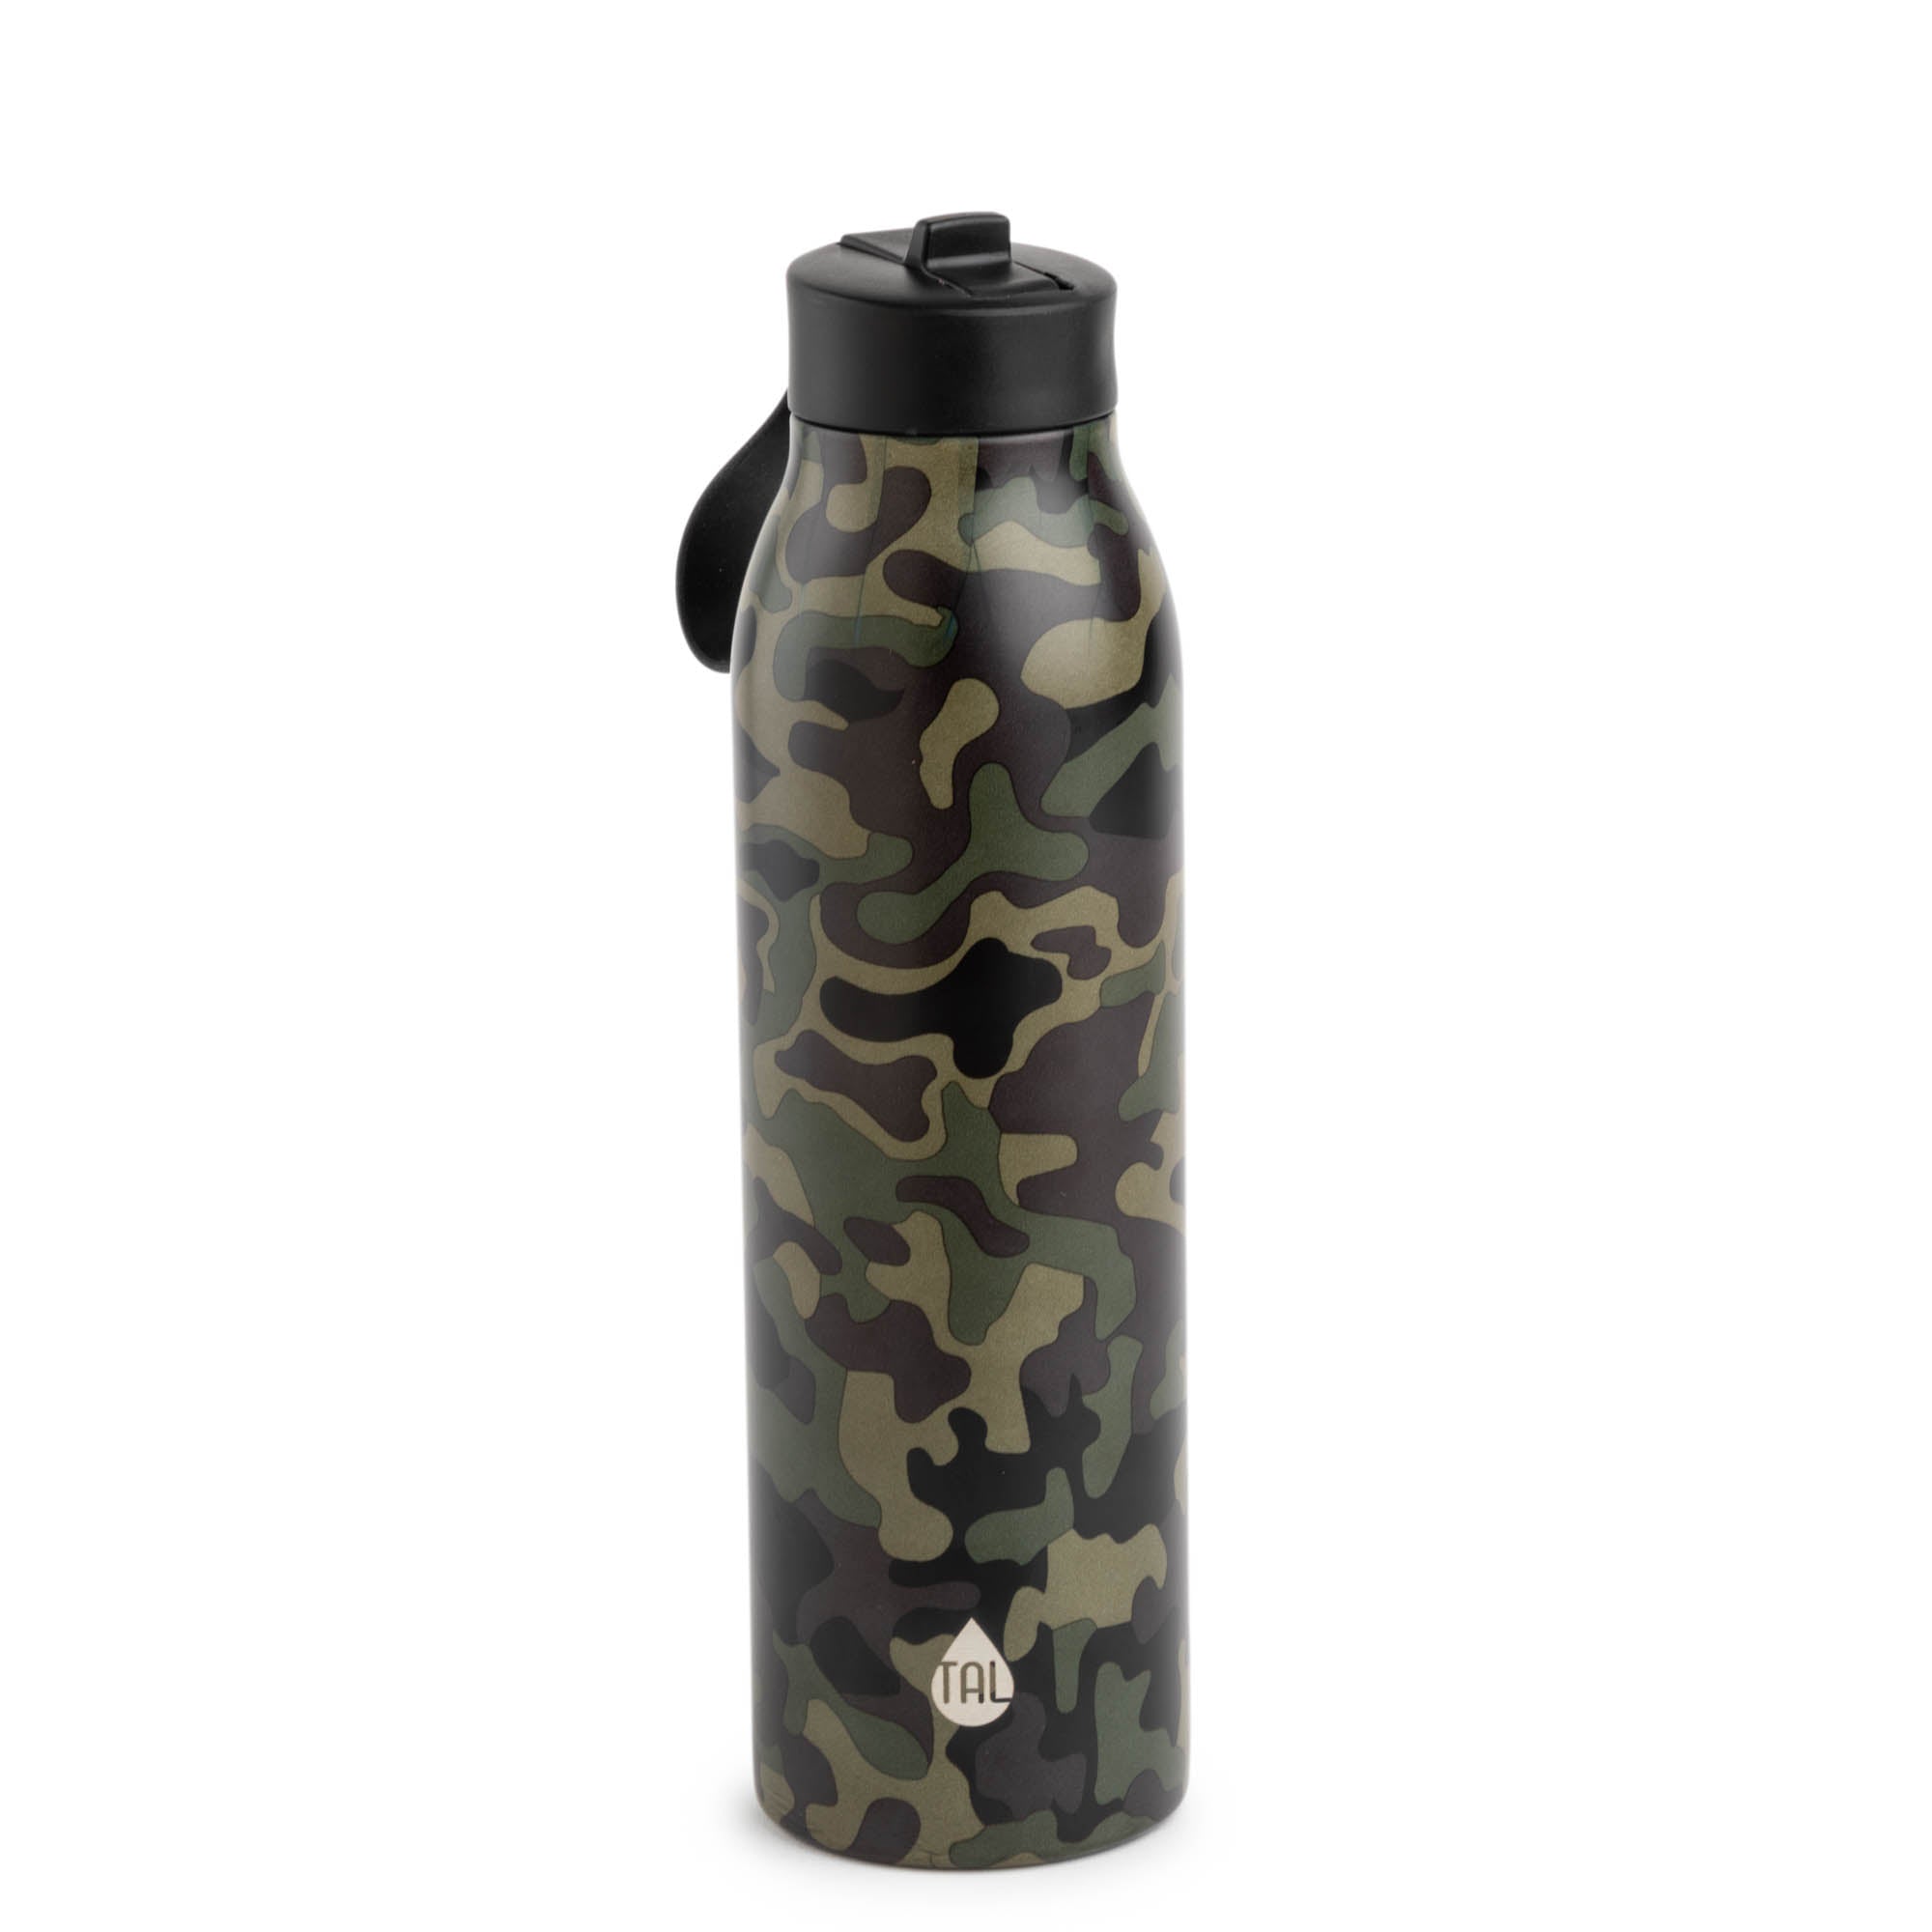 PURE Collection 16.9 oz. Water Bottle - Camouflage, Typhoon